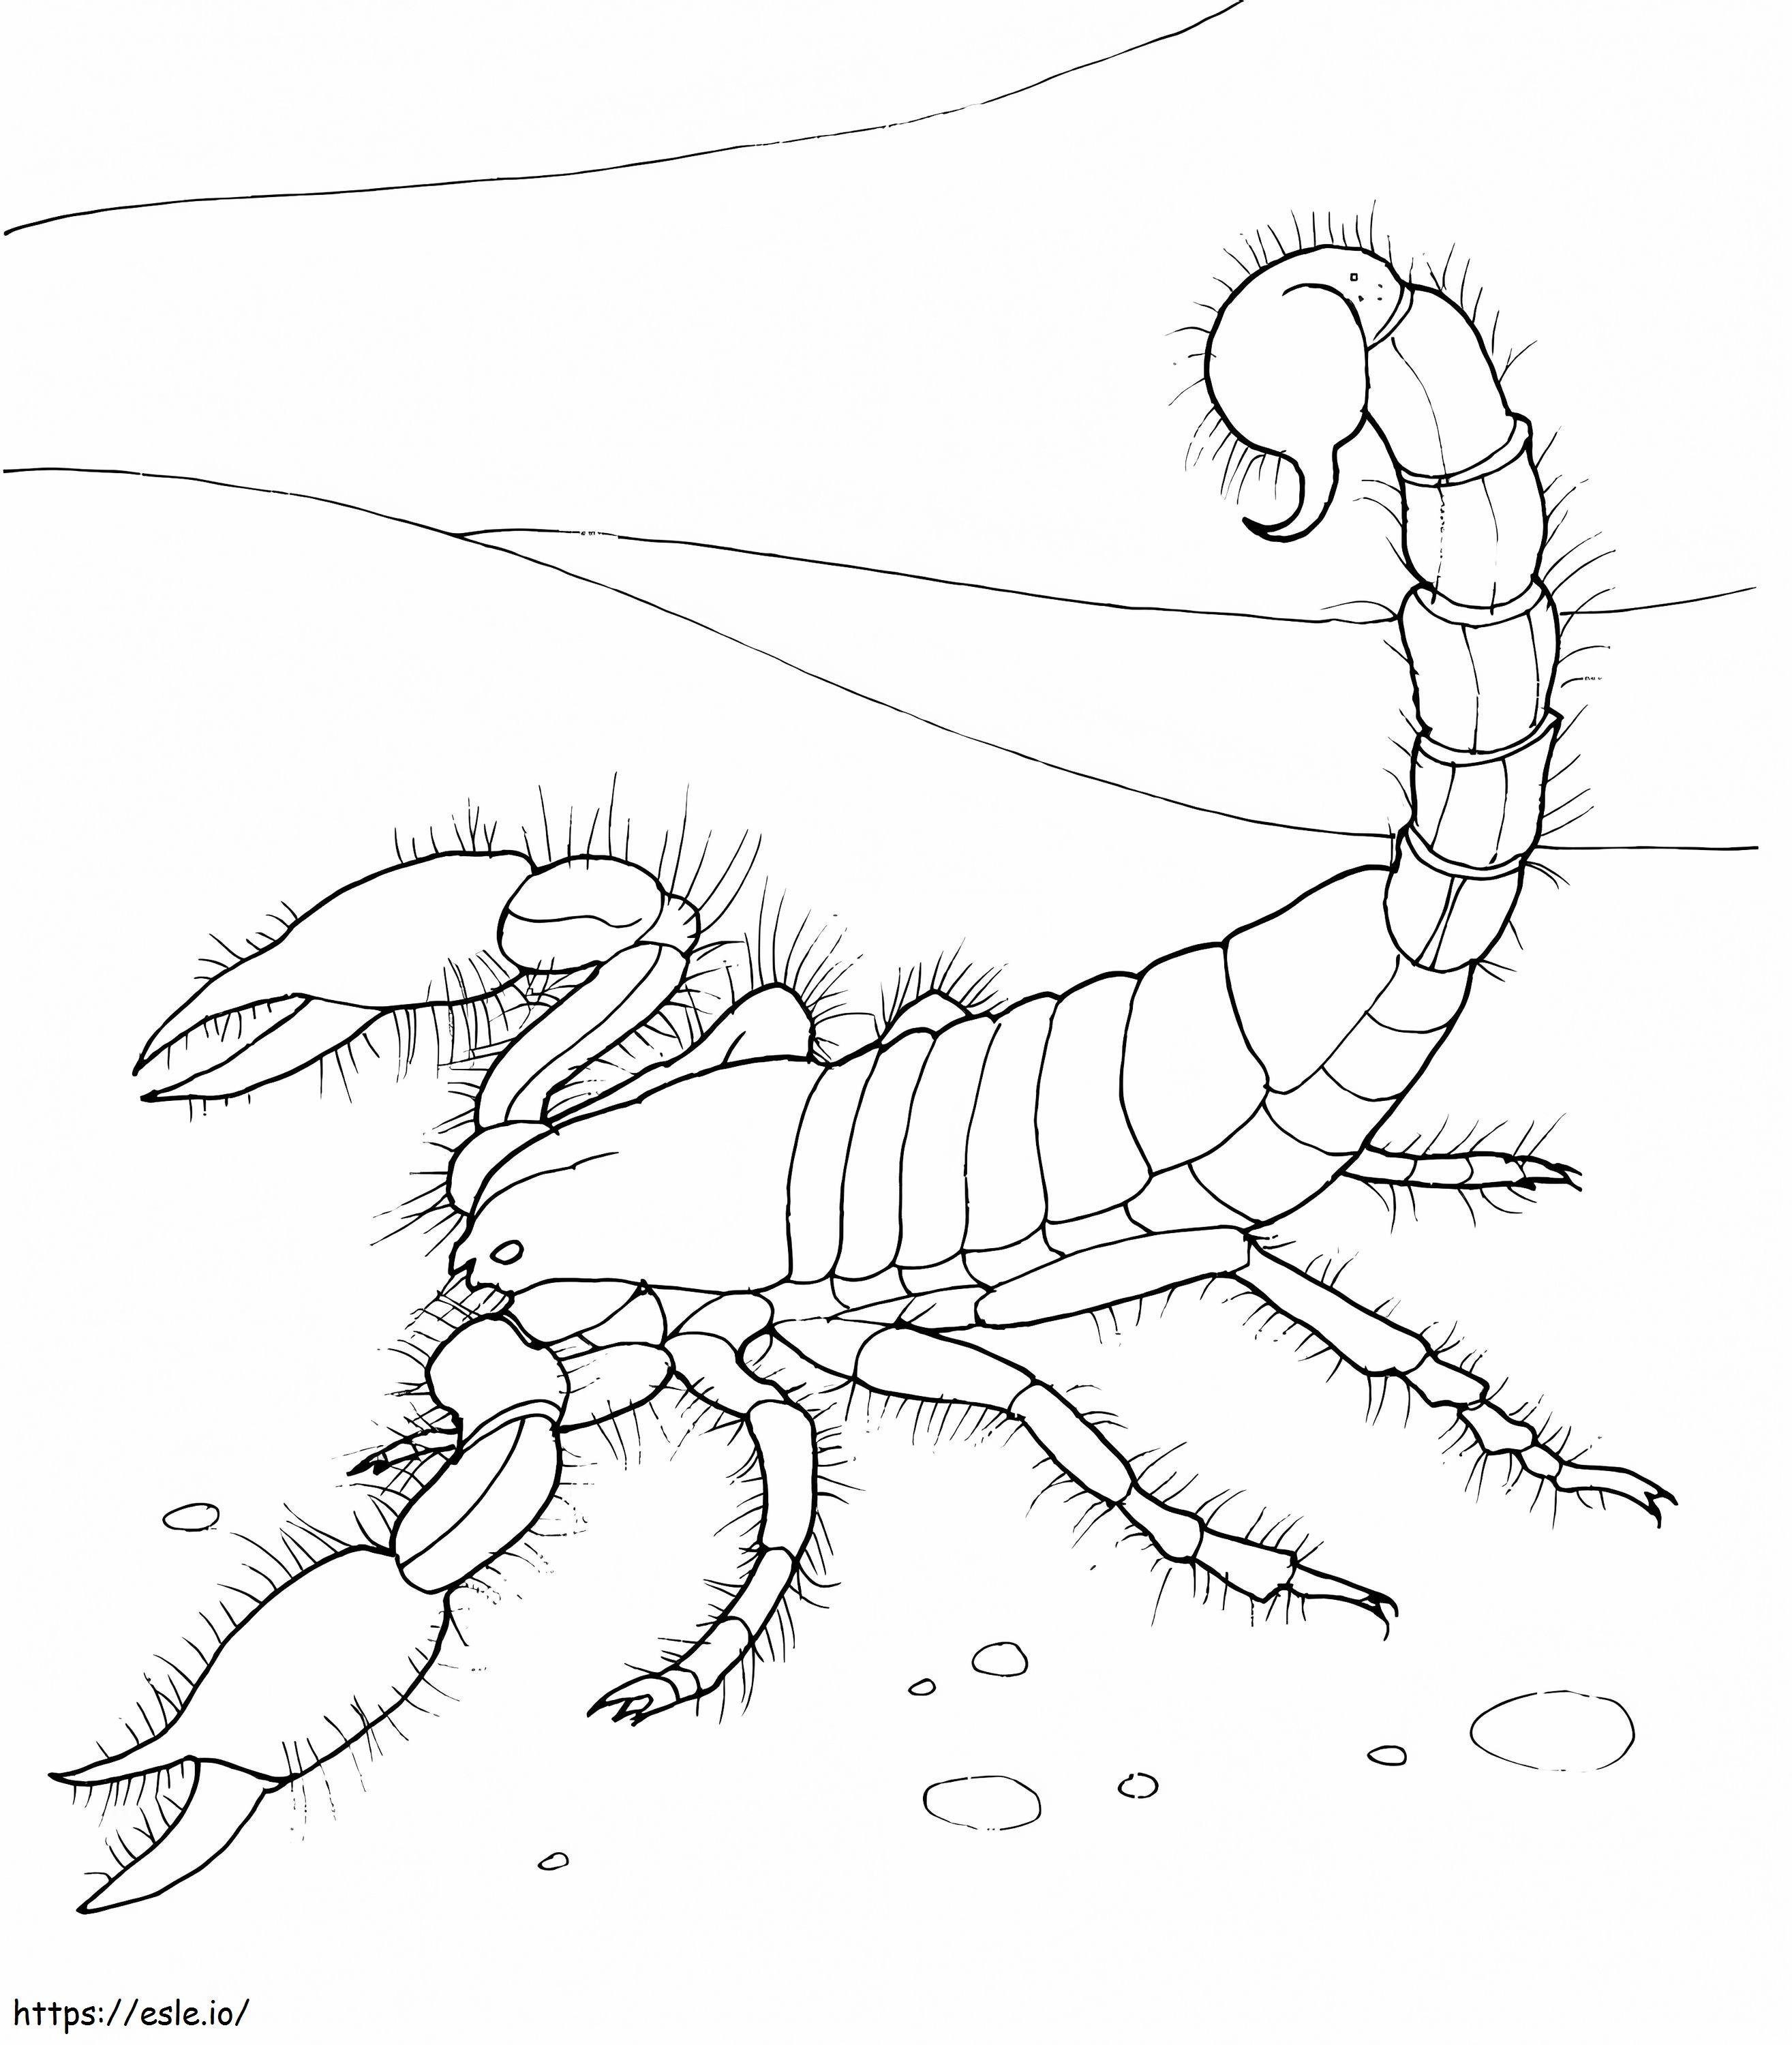 Giant Desert Scorpion 1 coloring page